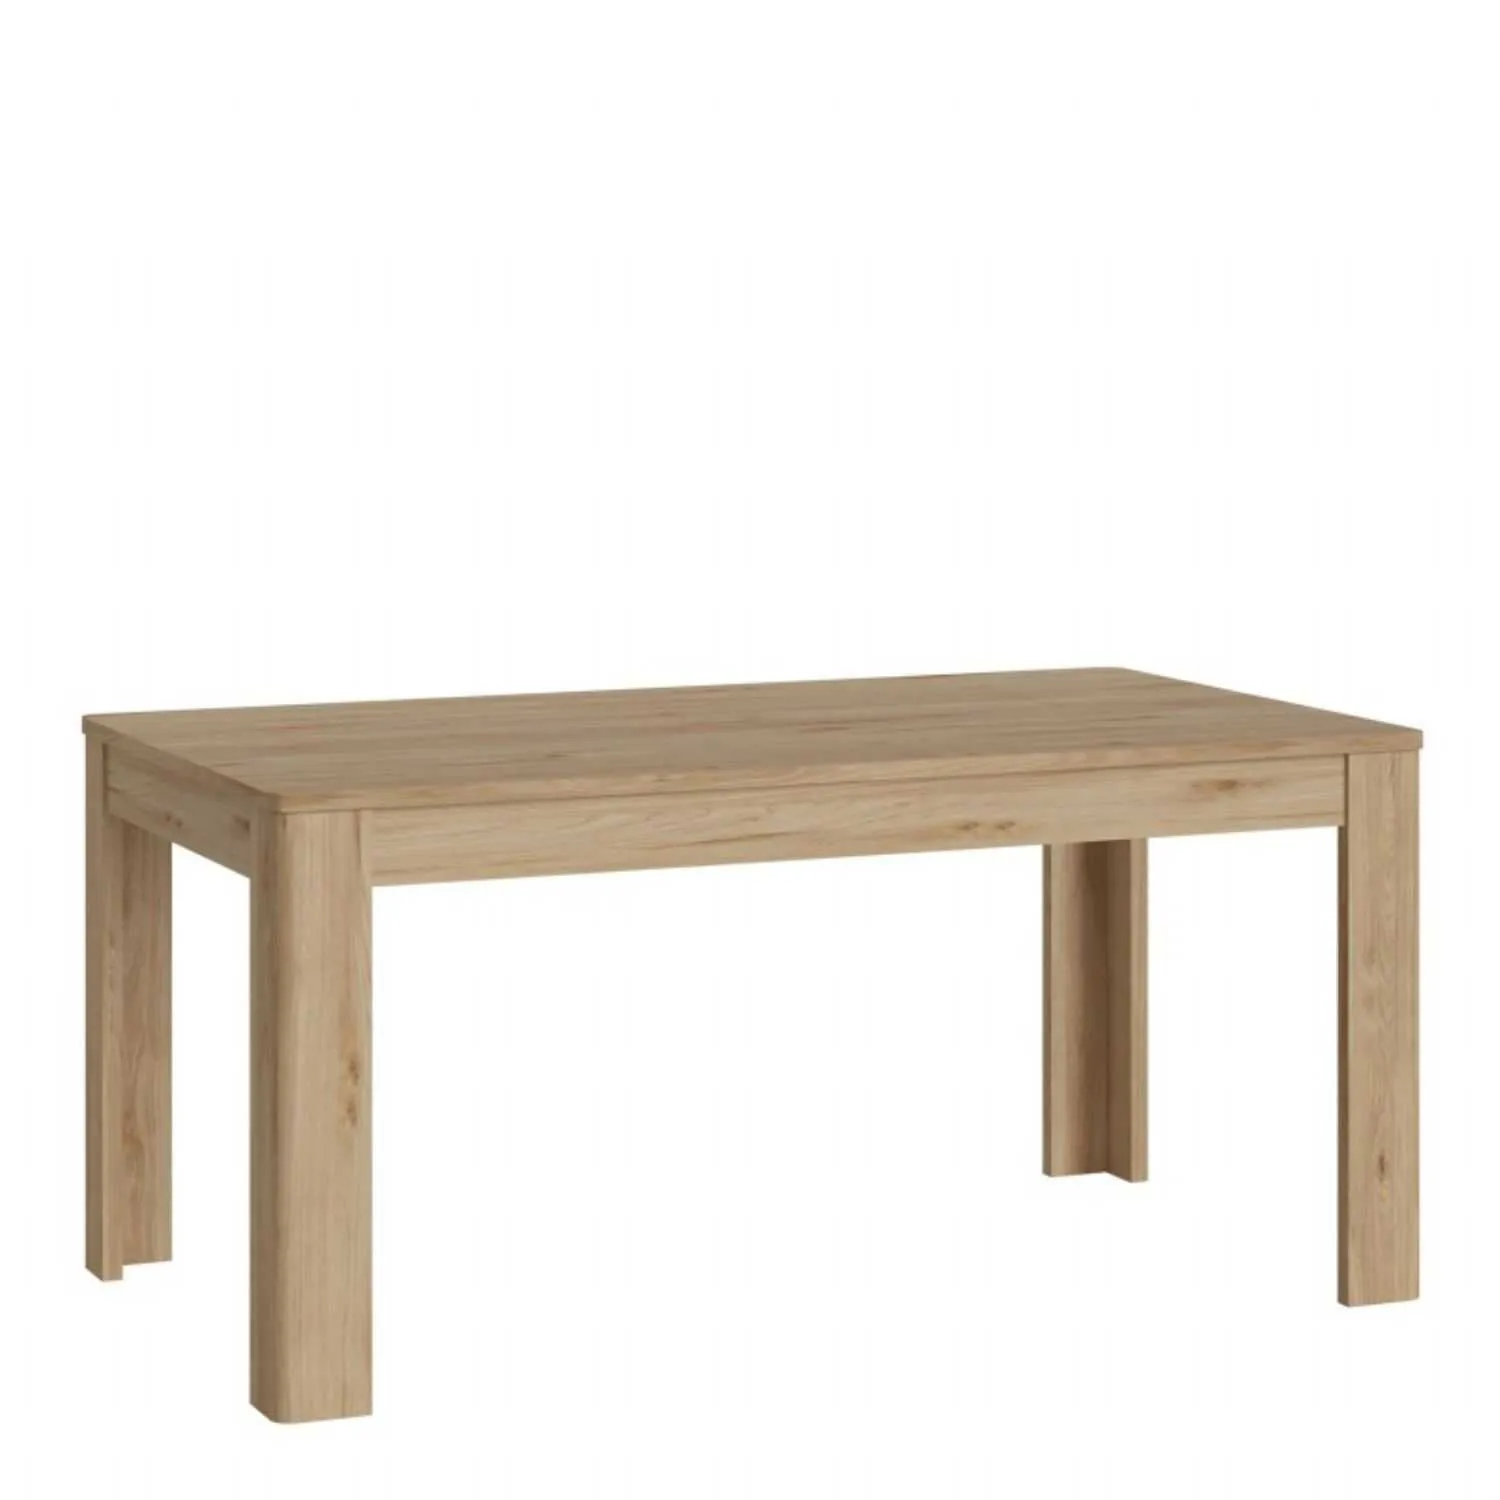 Cestino Extendable Table 160200 cm In Jackson Hickory Oak